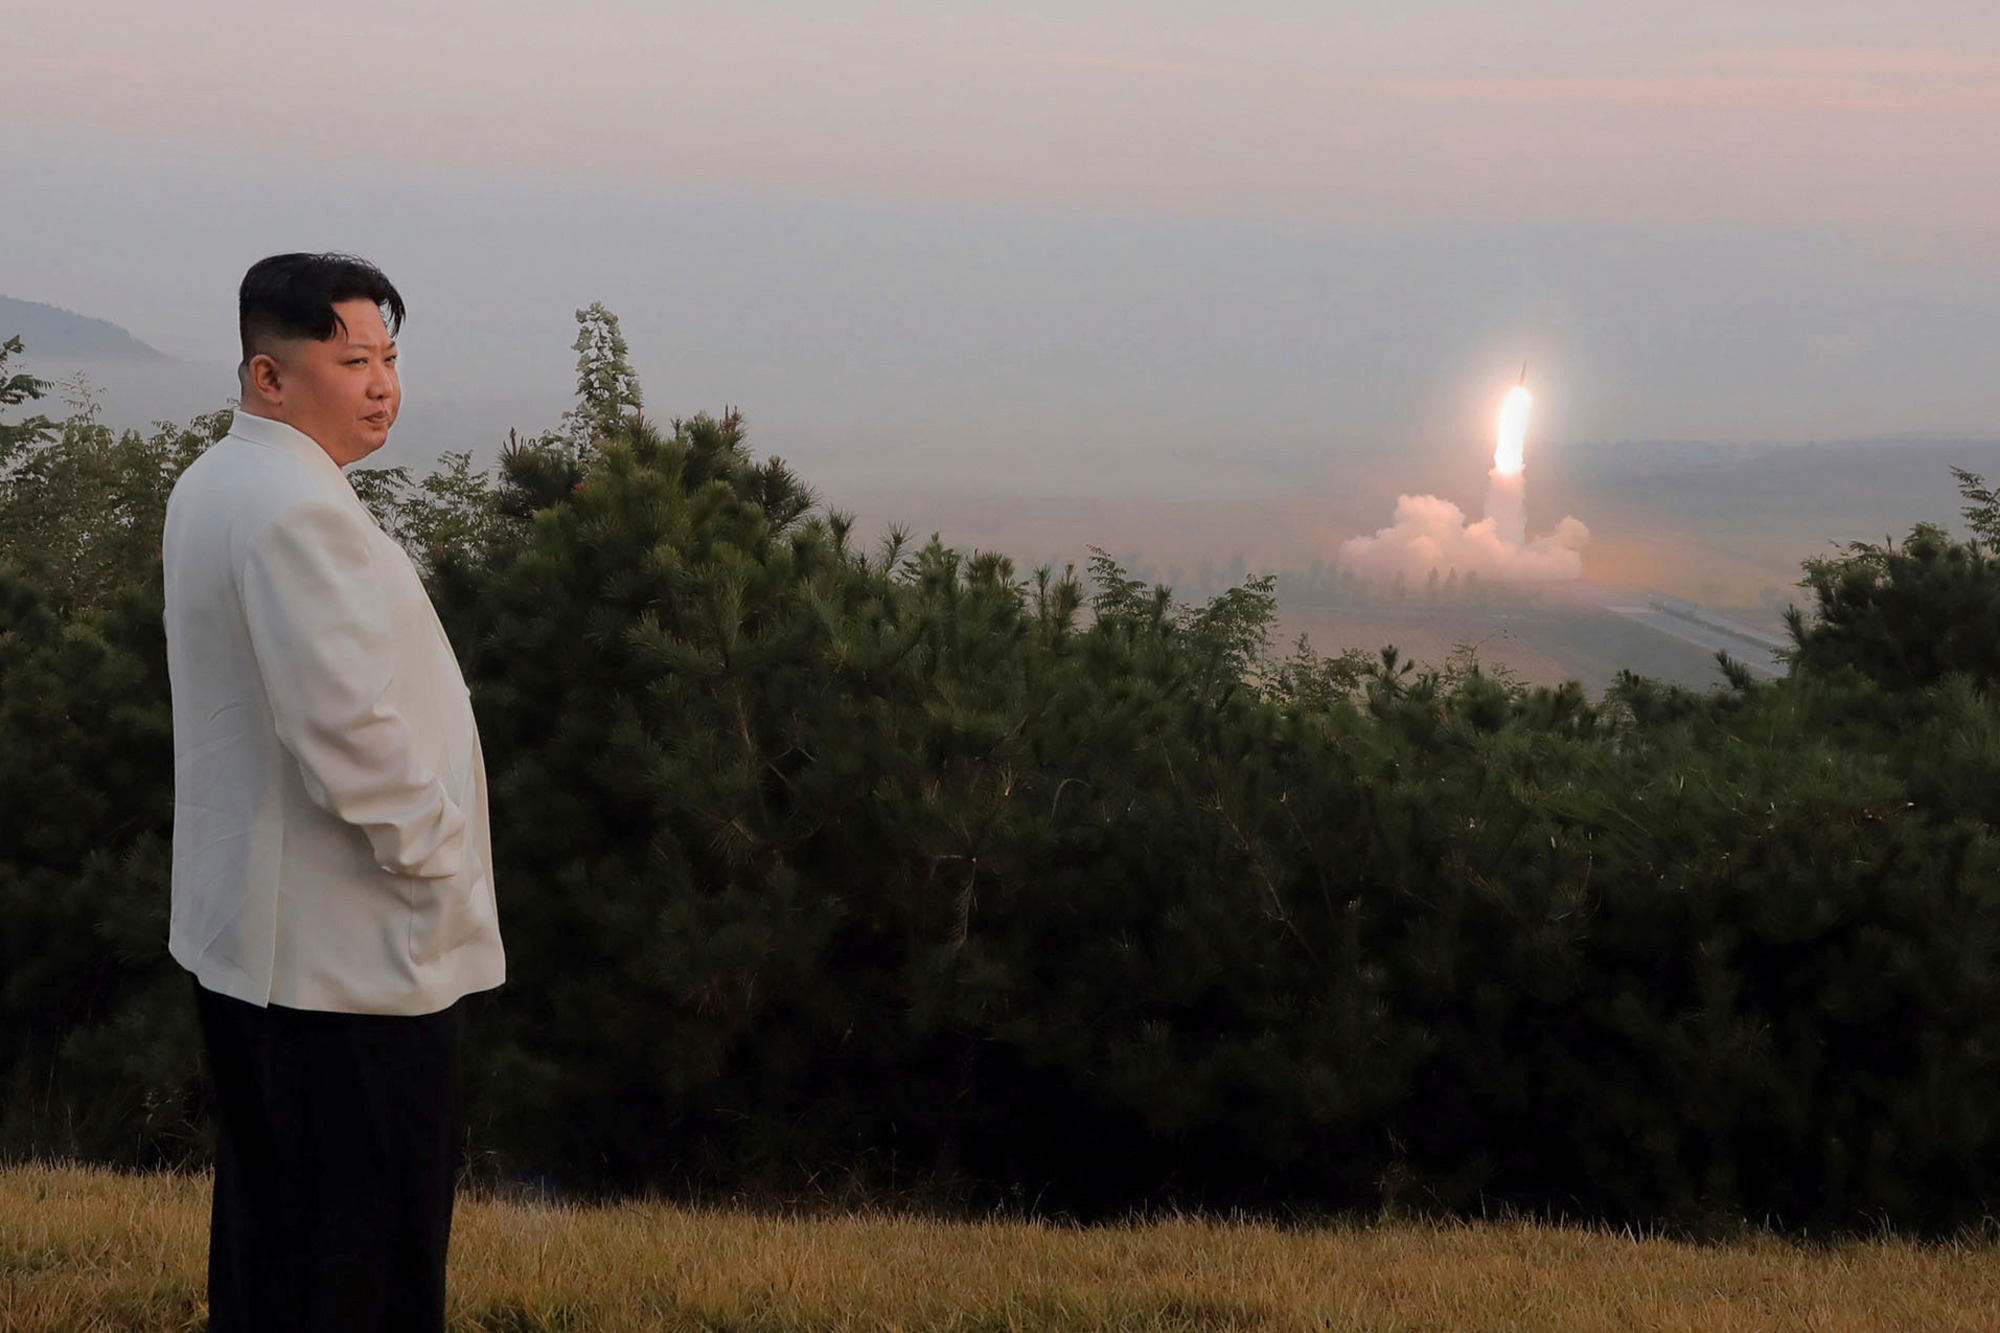 This photo provided by the North Korean government shows North Korean leader Kim Jong Un inspect a missile test at an undisclosed location sometime between Sept. 25 and Oct. 9. Independent journalists were not given access to cover the event depicted, and the content of this image cannot be independently verified. (Korean Central News Agency/Korea News Service/AP)